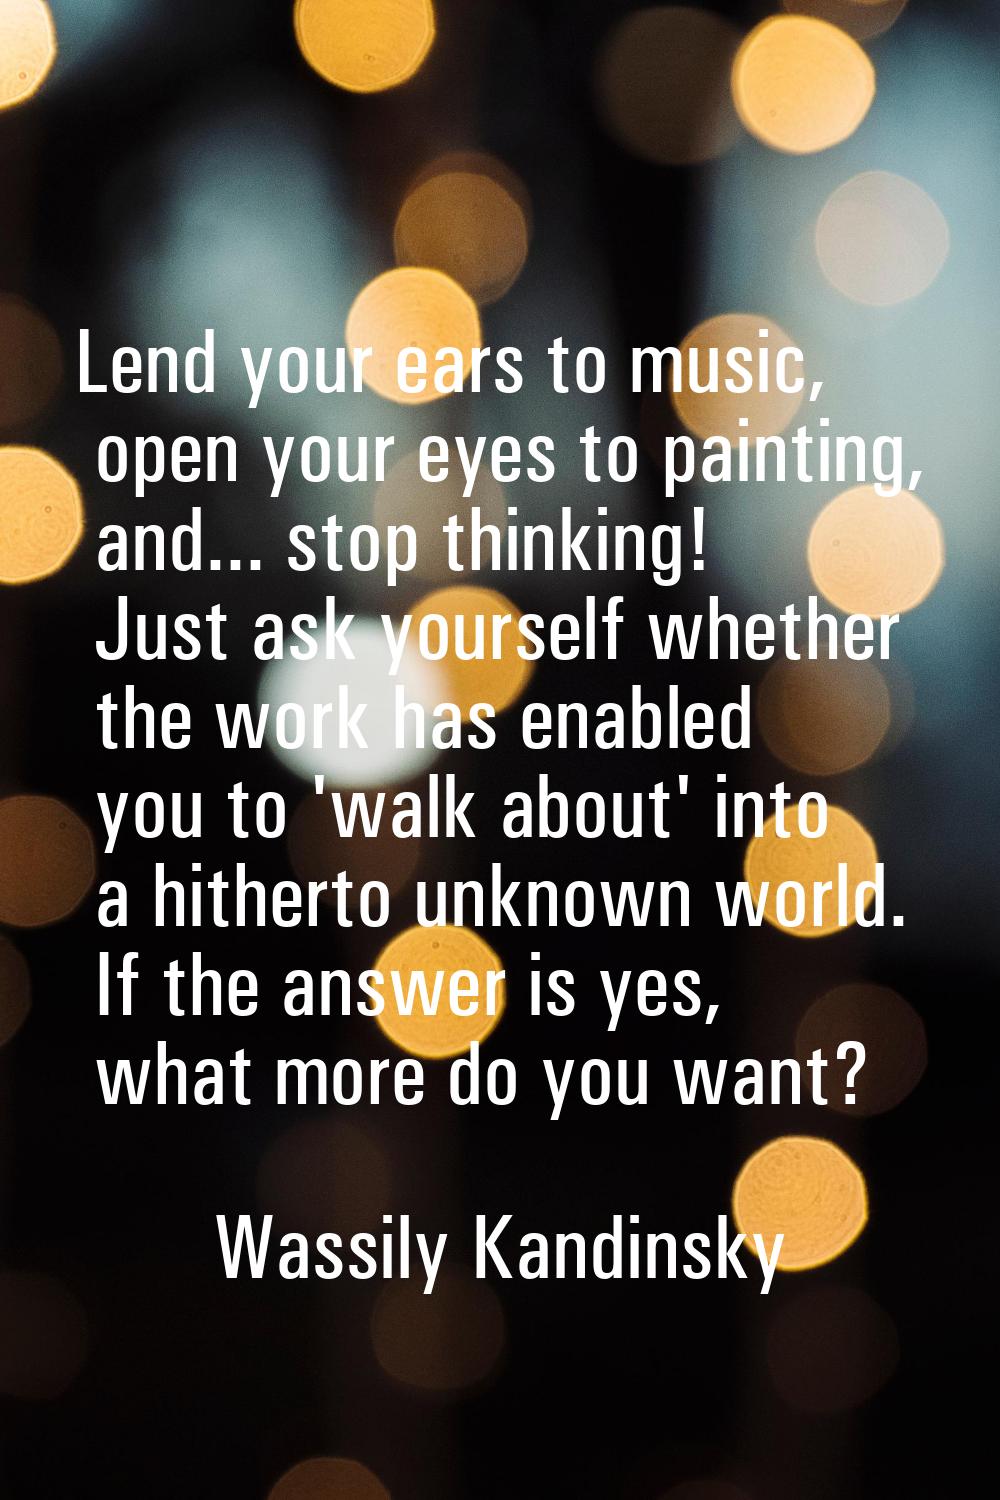 Lend your ears to music, open your eyes to painting, and... stop thinking! Just ask yourself whethe